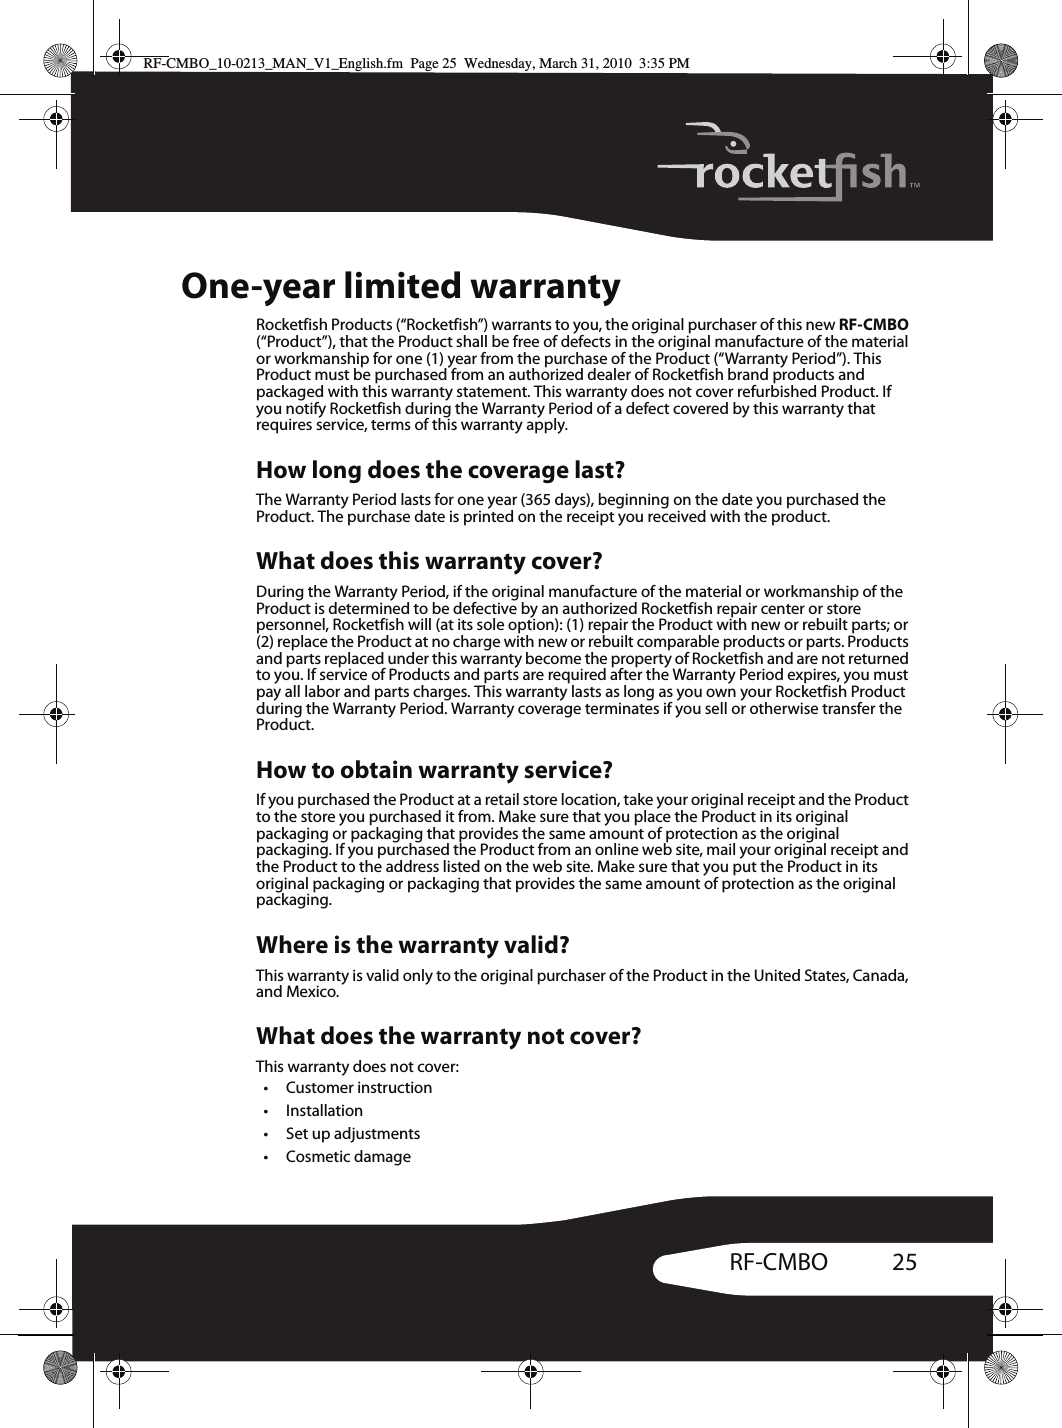 25RF-CMBOOne-year limited warrantyRocketfish Products (“Rocketfish”) warrants to you, the original purchaser of this new RF-CMBO (“Product”), that the Product shall be free of defects in the original manufacture of the material or workmanship for one (1) year from the purchase of the Product (“Warranty Period”). This Product must be purchased from an authorized dealer of Rocketfish brand products and packaged with this warranty statement. This warranty does not cover refurbished Product. If you notify Rocketfish during the Warranty Period of a defect covered by this warranty that requires service, terms of this warranty apply.How long does the coverage last?The Warranty Period lasts for one year (365 days), beginning on the date you purchased the Product. The purchase date is printed on the receipt you received with the product.What does this warranty cover?During the Warranty Period, if the original manufacture of the material or workmanship of the Product is determined to be defective by an authorized Rocketfish repair center or store personnel, Rocketfish will (at its sole option): (1) repair the Product with new or rebuilt parts; or (2) replace the Product at no charge with new or rebuilt comparable products or parts. Products and parts replaced under this warranty become the property of Rocketfish and are not returned to you. If service of Products and parts are required after the Warranty Period expires, you must pay all labor and parts charges. This warranty lasts as long as you own your Rocketfish Product during the Warranty Period. Warranty coverage terminates if you sell or otherwise transfer the Product.How to obtain warranty service?If you purchased the Product at a retail store location, take your original receipt and the Product to the store you purchased it from. Make sure that you place the Product in its original packaging or packaging that provides the same amount of protection as the original packaging. If you purchased the Product from an online web site, mail your original receipt and the Product to the address listed on the web site. Make sure that you put the Product in its original packaging or packaging that provides the same amount of protection as the original packaging.Where is the warranty valid?This warranty is valid only to the original purchaser of the Product in the United States, Canada, and Mexico.What does the warranty not cover?This warranty does not cover:• Customer instruction• Installation•Set up adjustments•Cosmetic damageRF-CMBO_10-0213_MAN_V1_English.fm  Page 25  Wednesday, March 31, 2010  3:35 PM